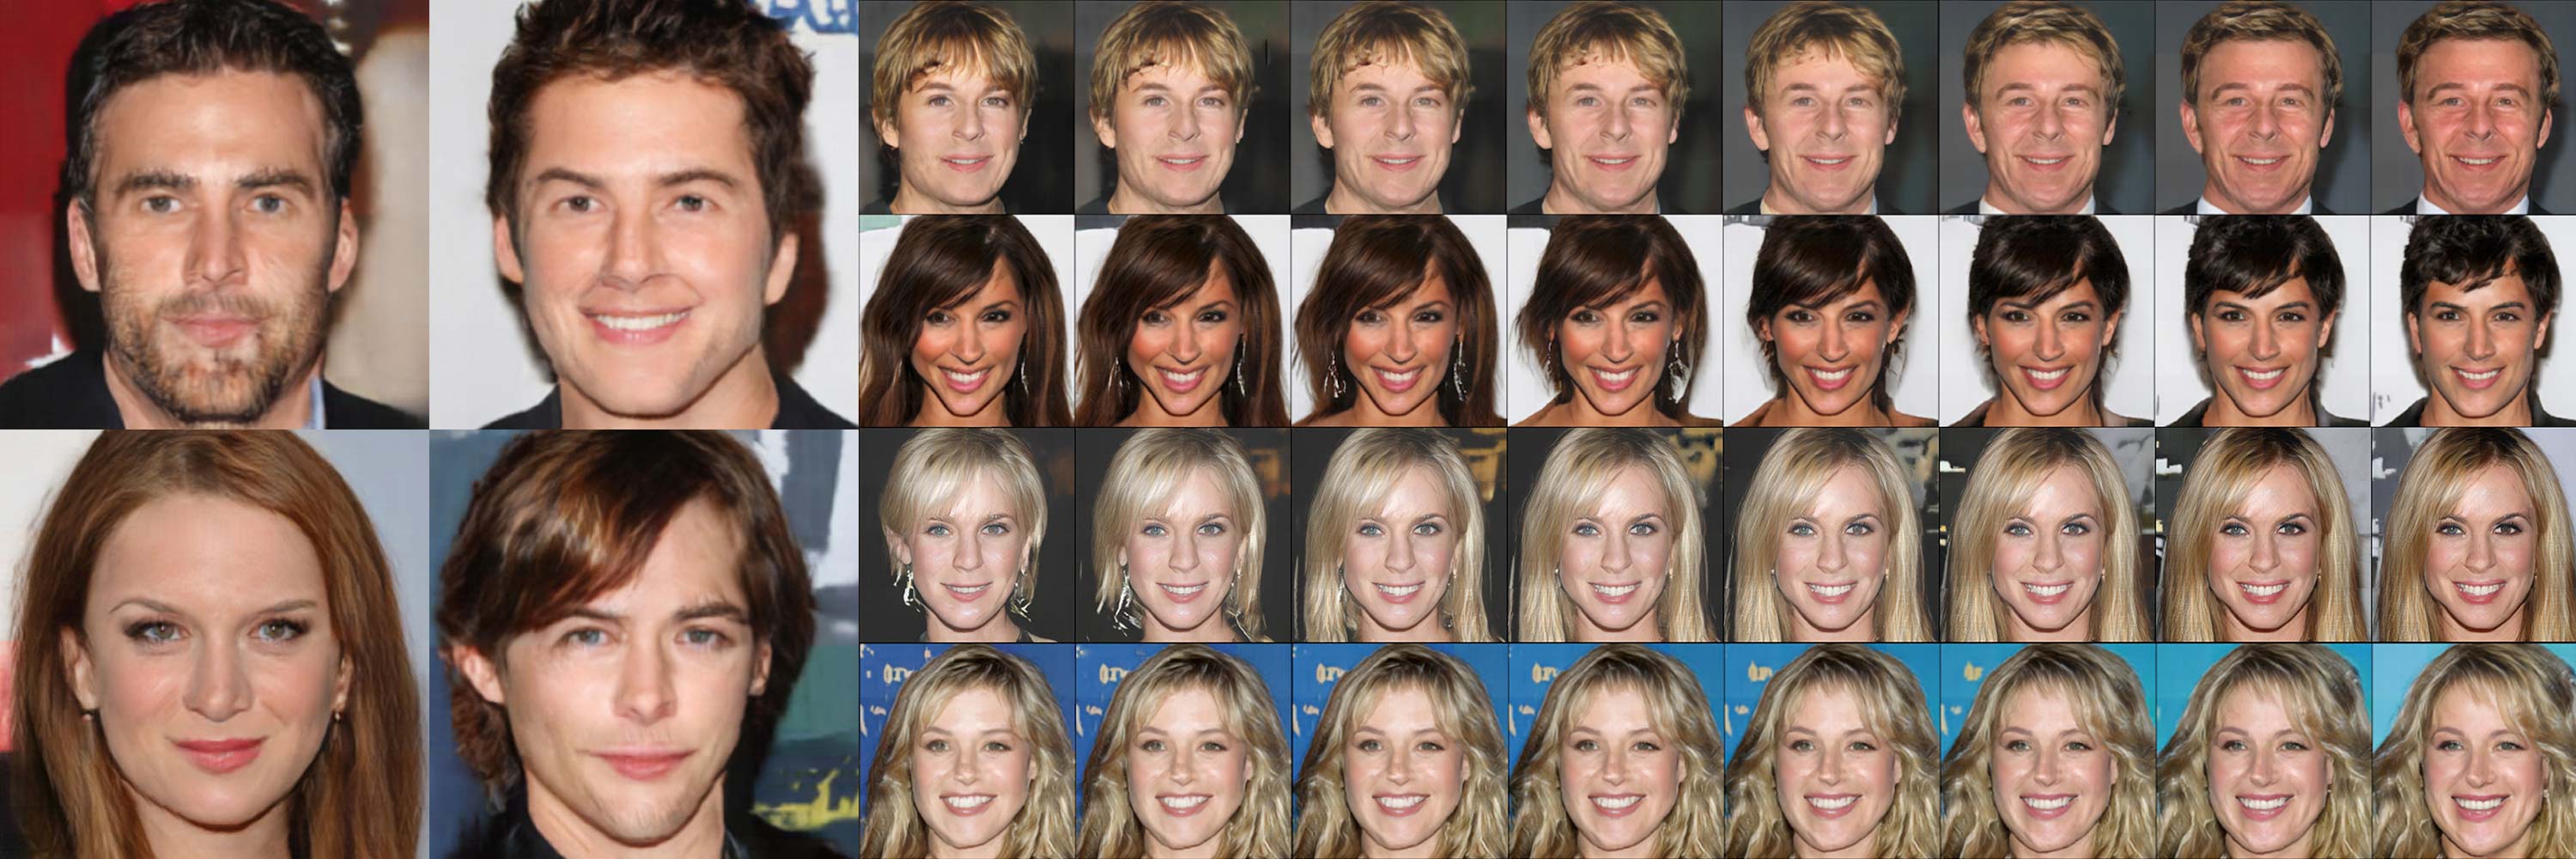 Collage of multiple faces generated by an artificial intelligence